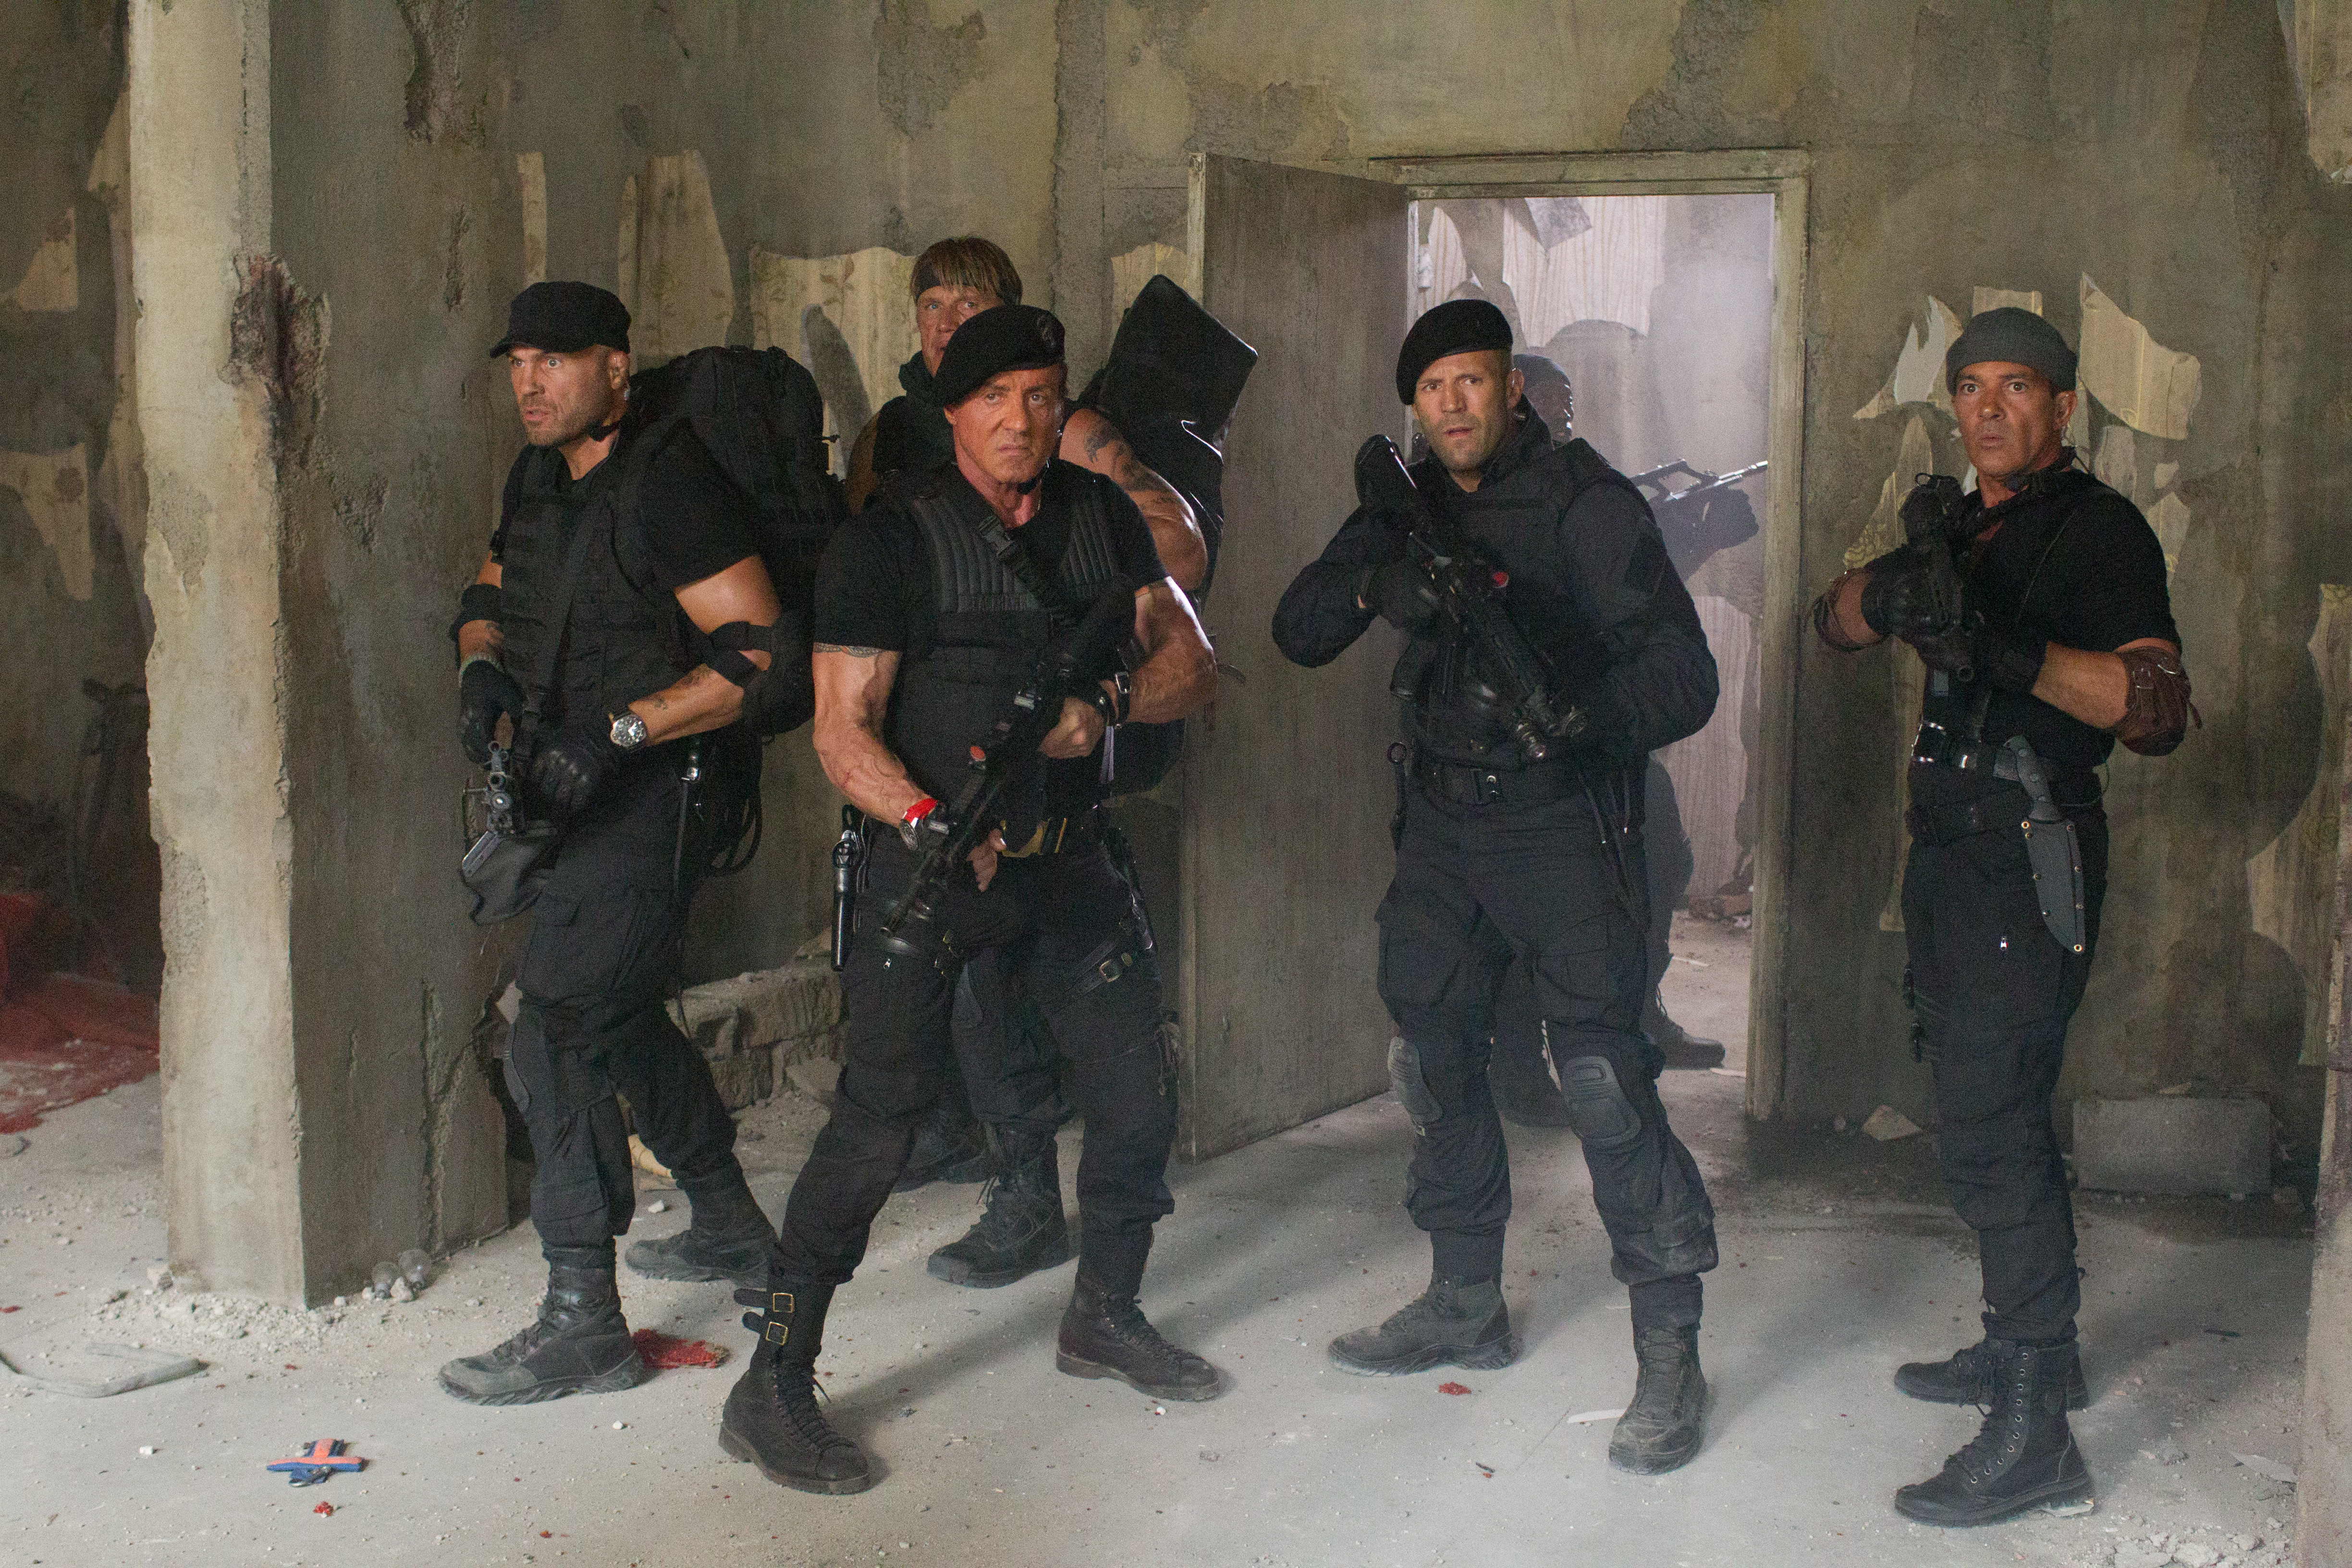 android dolph lundgren, movie, the expendables 3, antonio banderas, barney ross, galgo (the expendables), gunnar jensen, jason statham, lee christmas, randy couture, sylvester stallone, toll road, the expendables